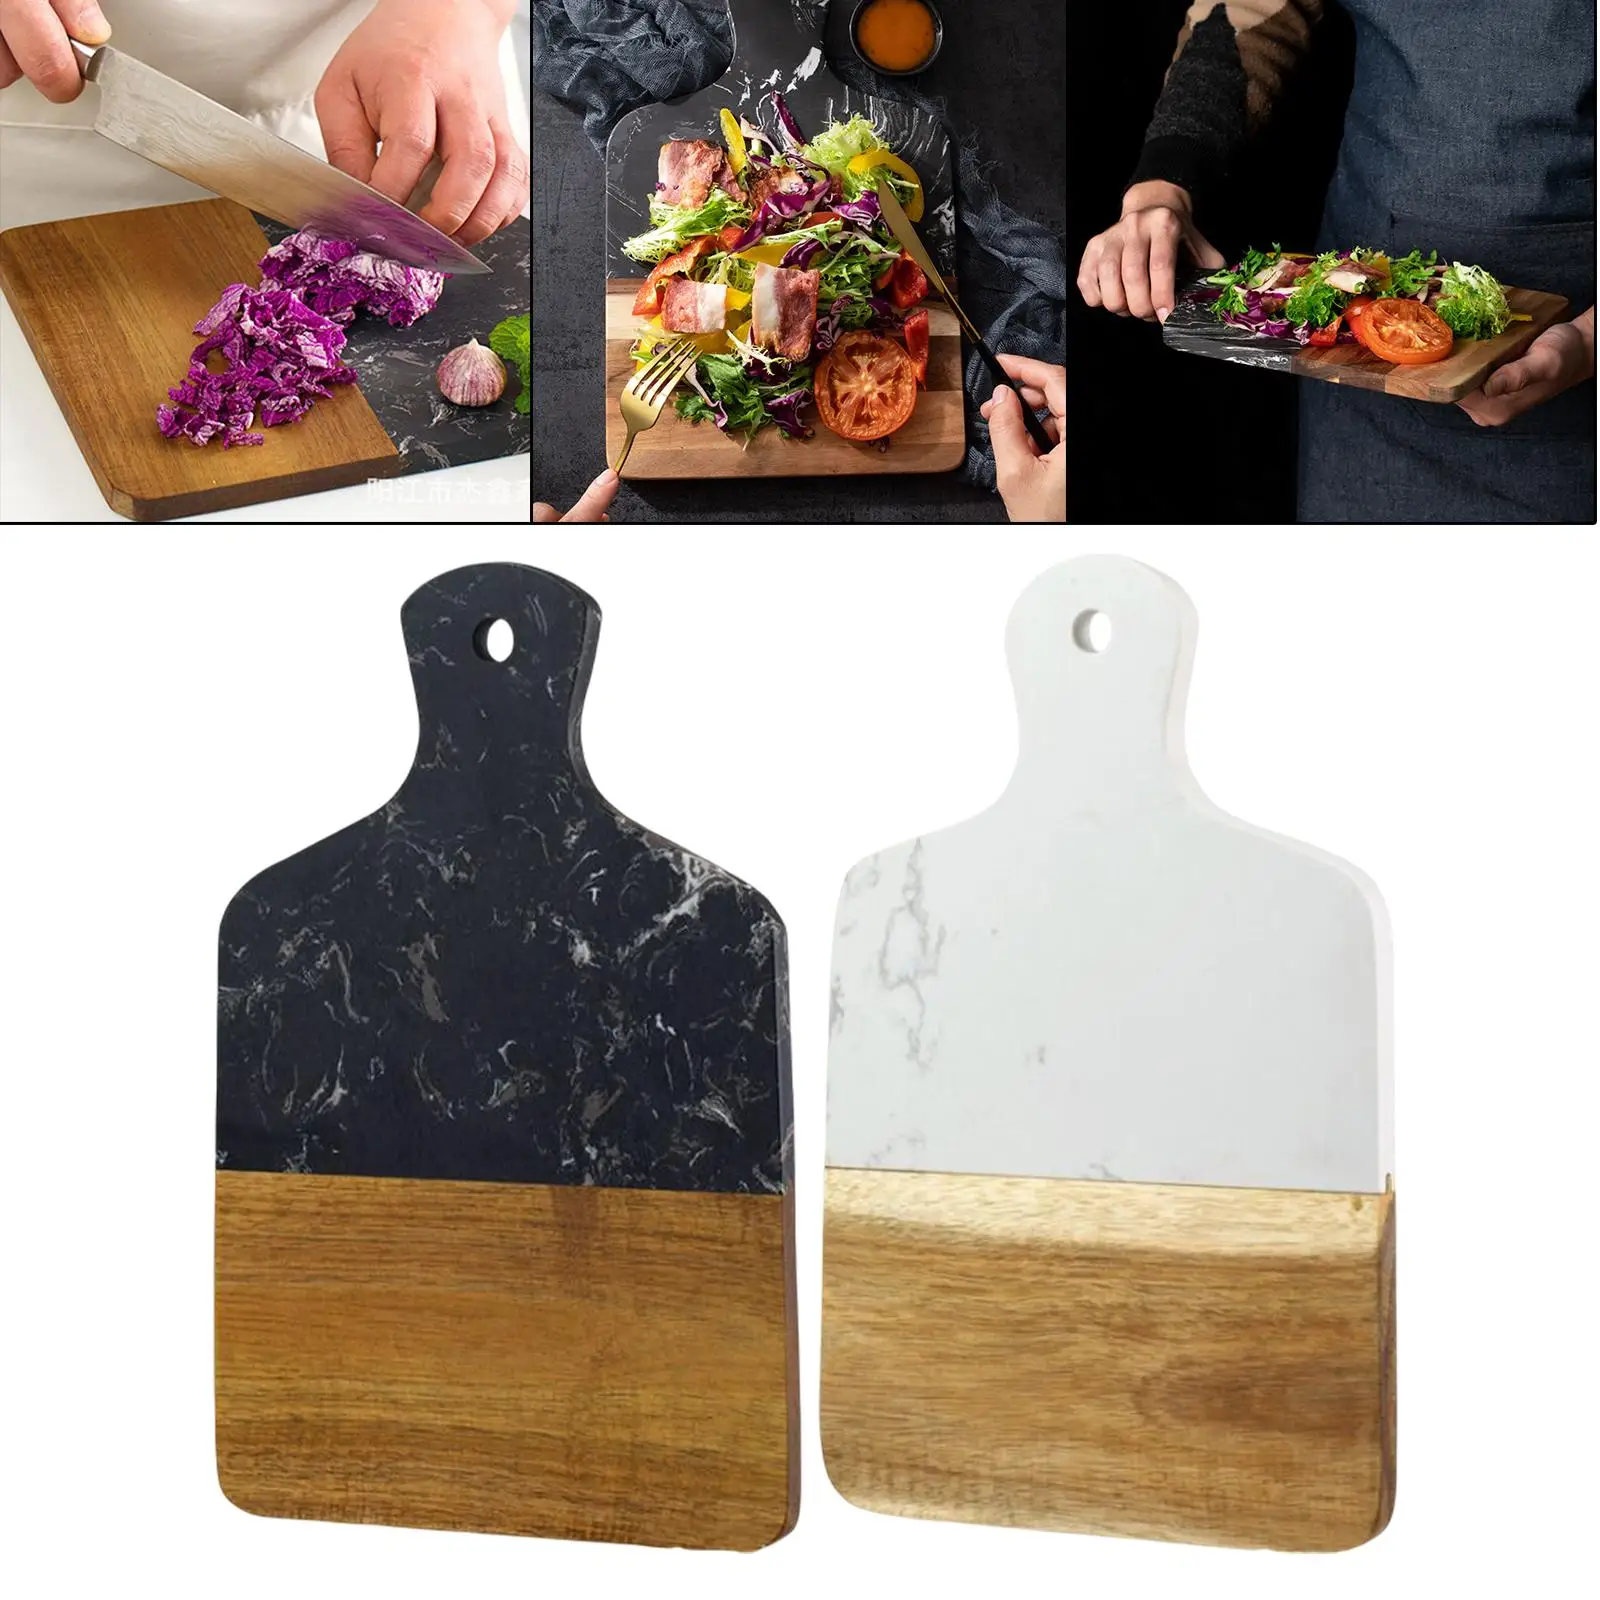 Portable Wooden Marble Cutting Board with Handles Hanging Hole Design Chopping Boards for Pastry Crackers Bread Meats Restaurant